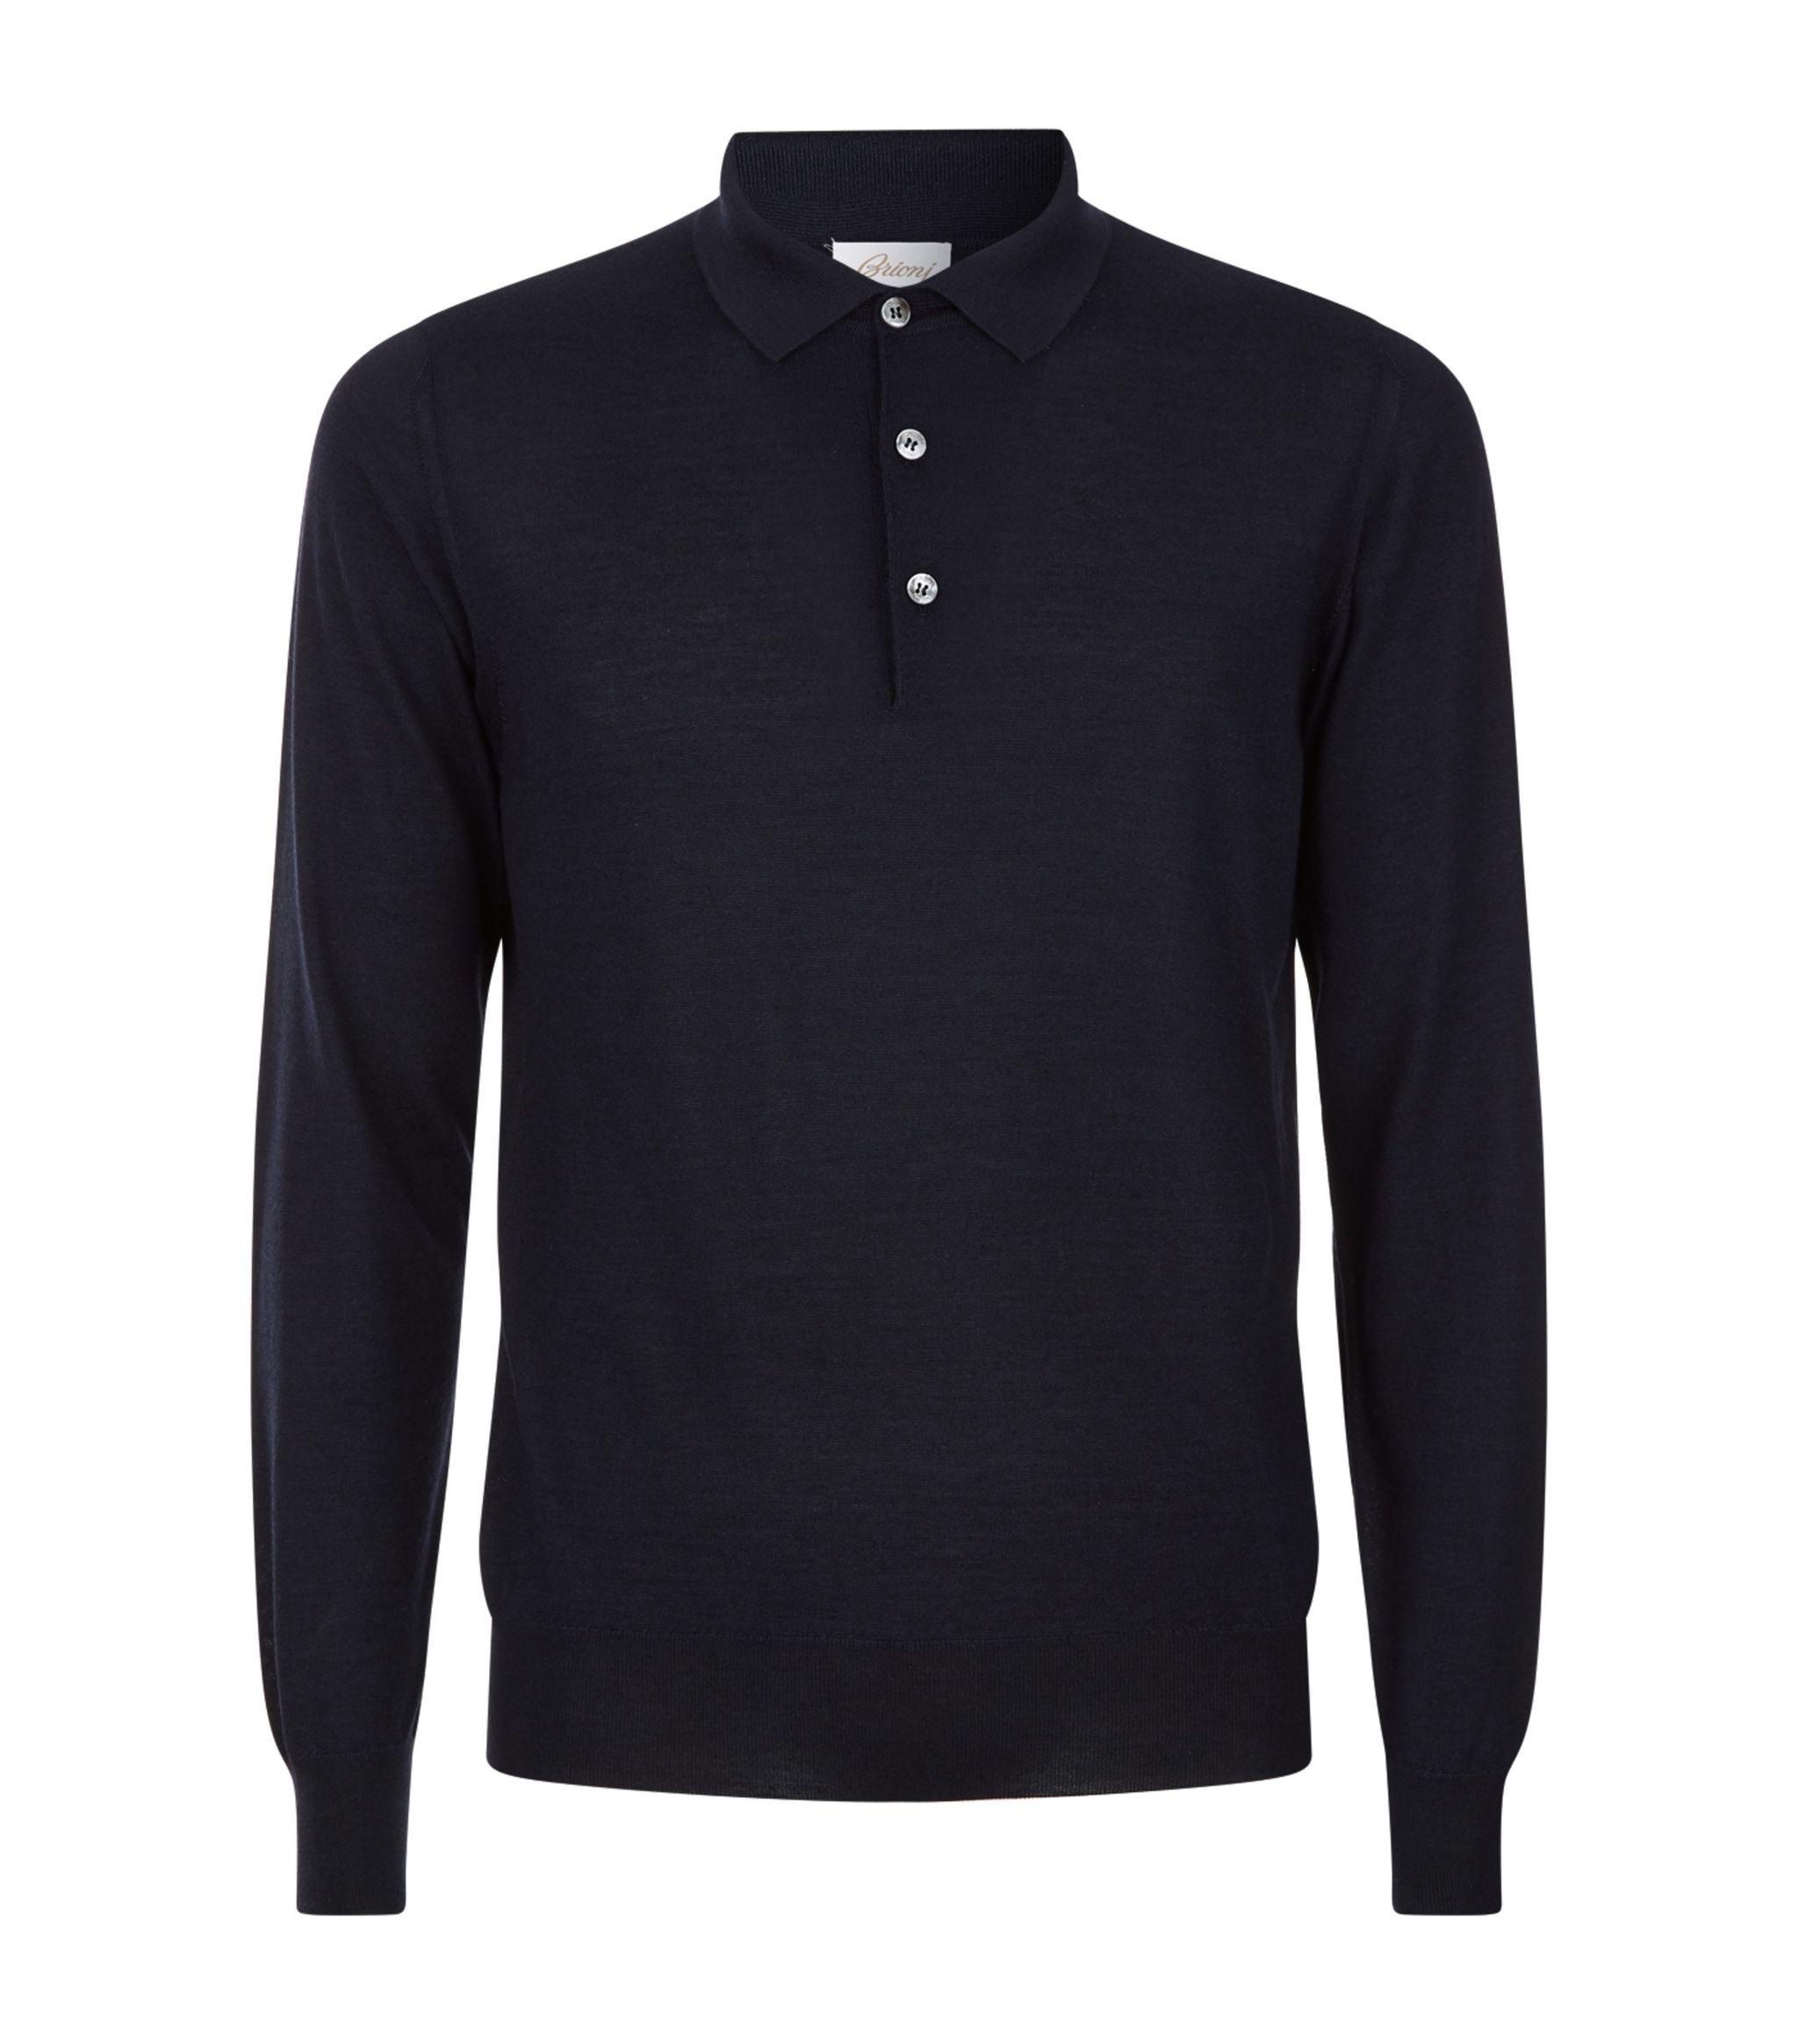 Brioni Wool Fine Knit Polo Shirt in Blue for Men - Lyst